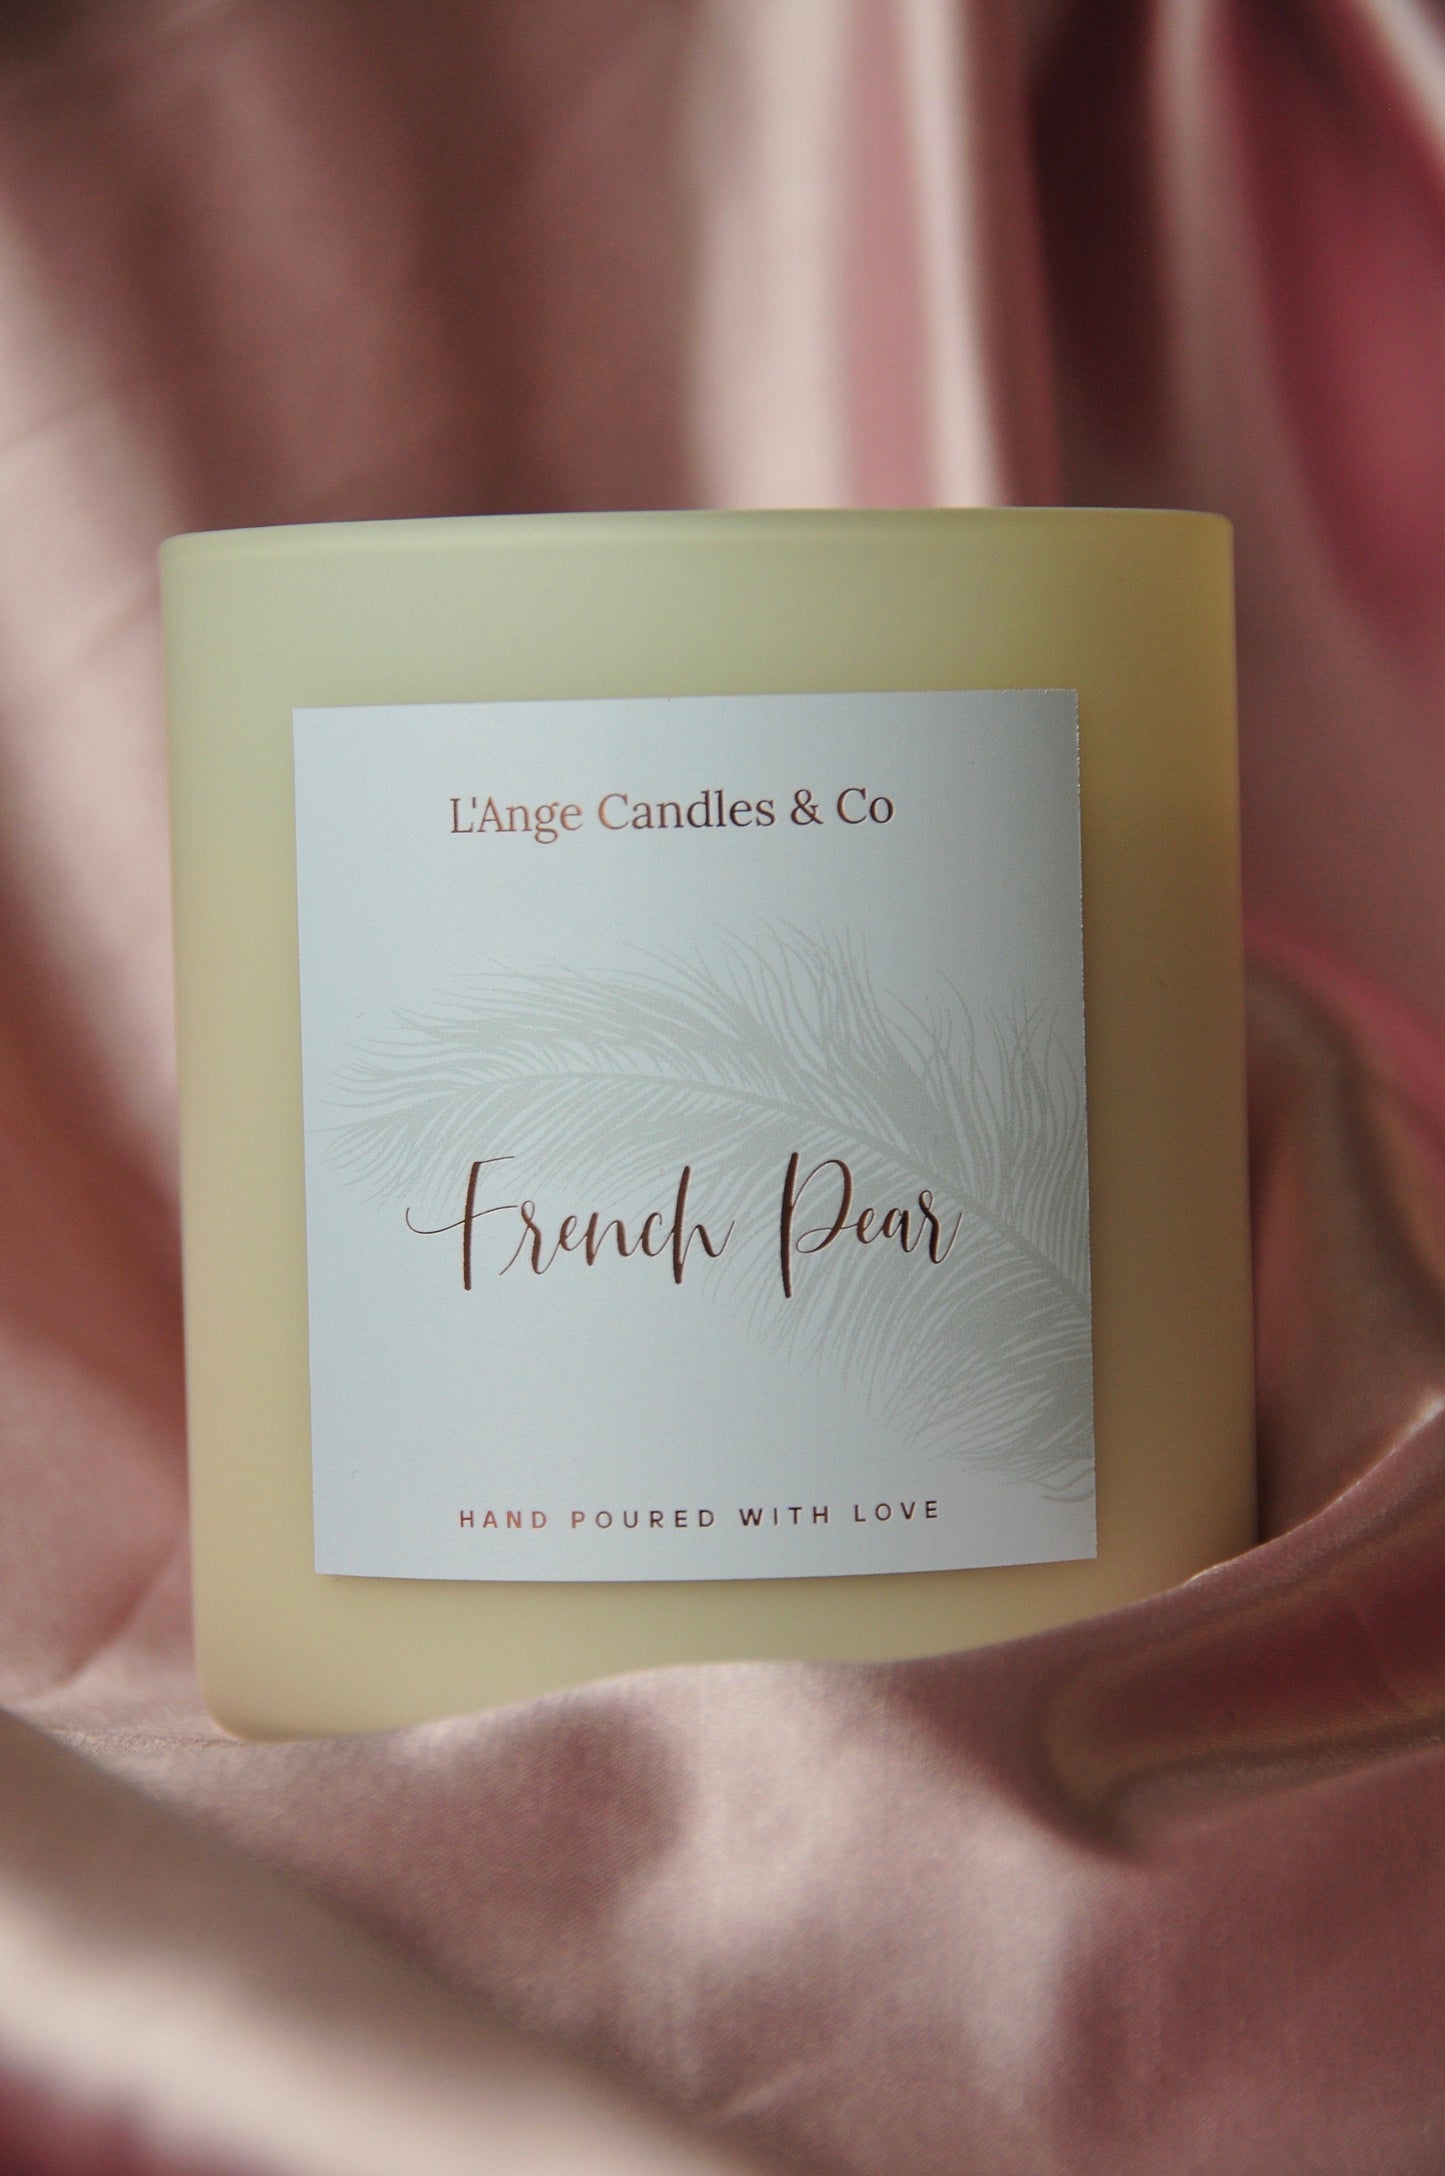 CHAMPAGNE & STRAWBERRY DELUXE CANDLE